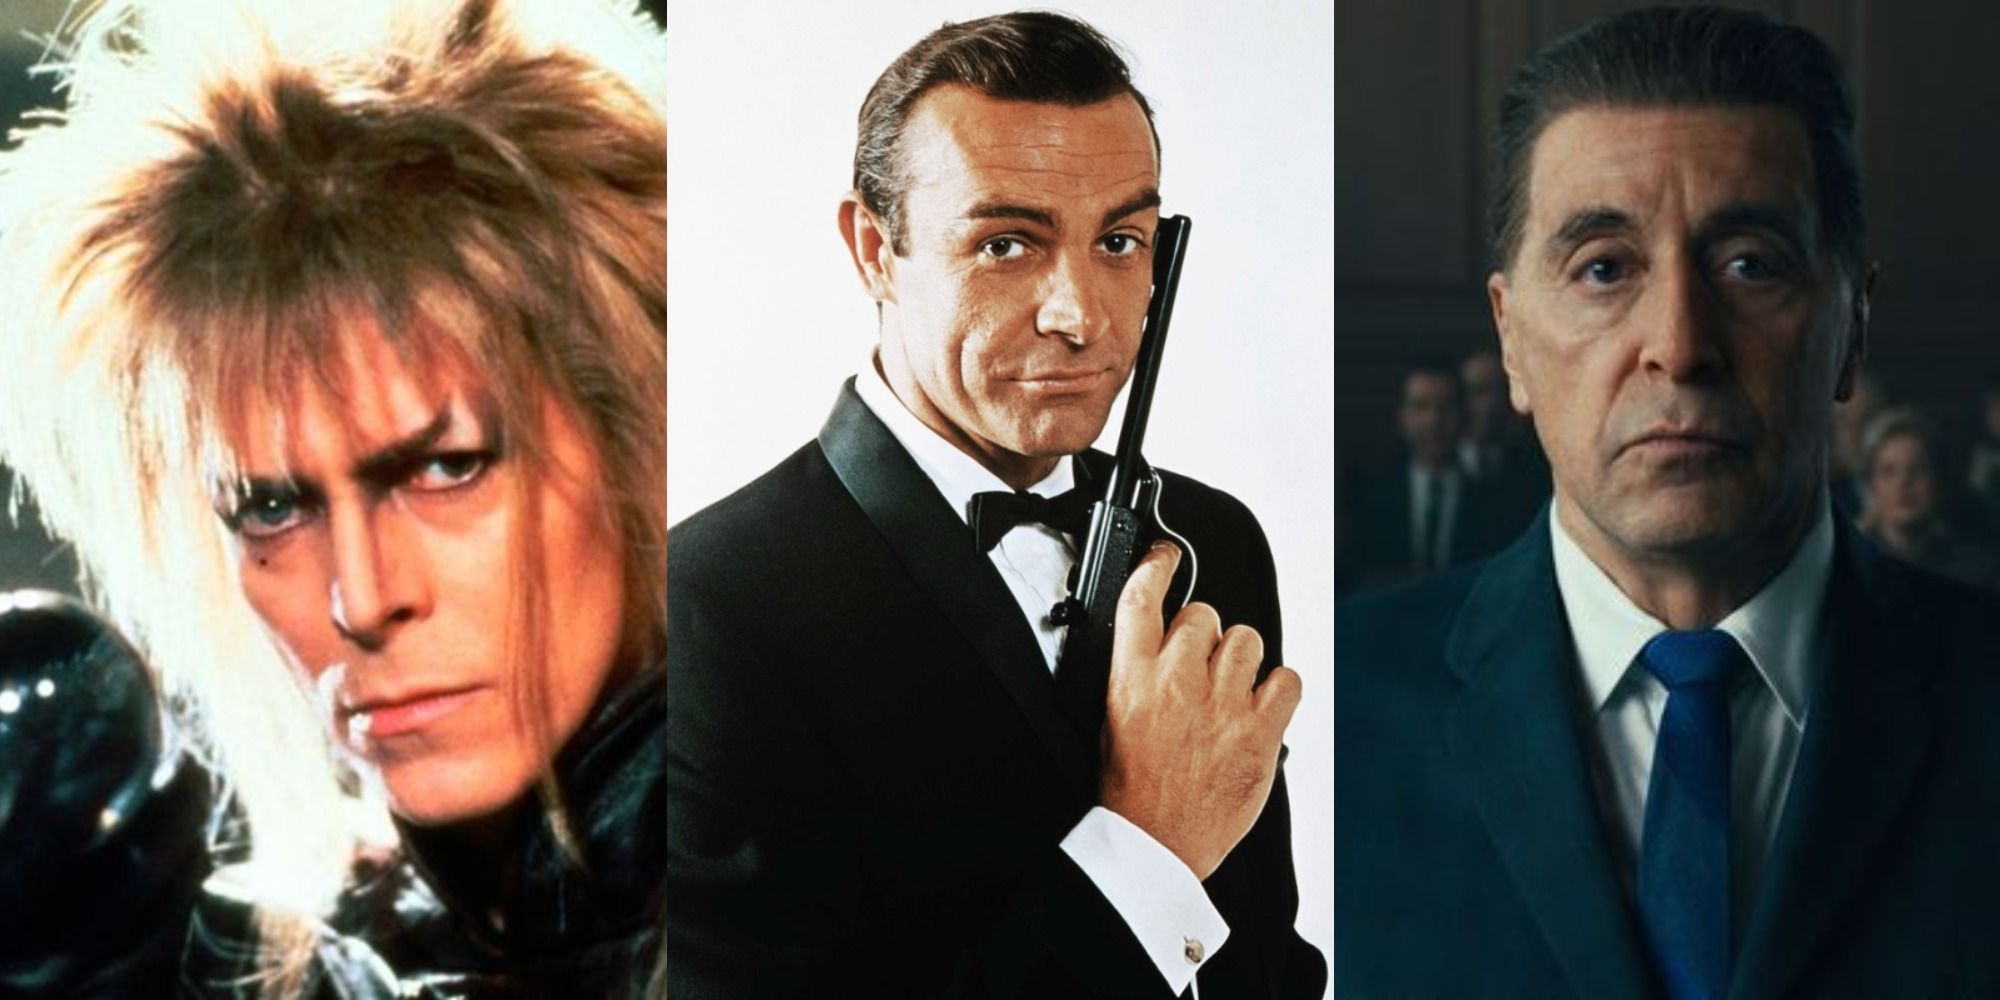 Split image of David Bowie in Labyrinth, Sean Connery as James Bond and Al Pacino in The Irishman